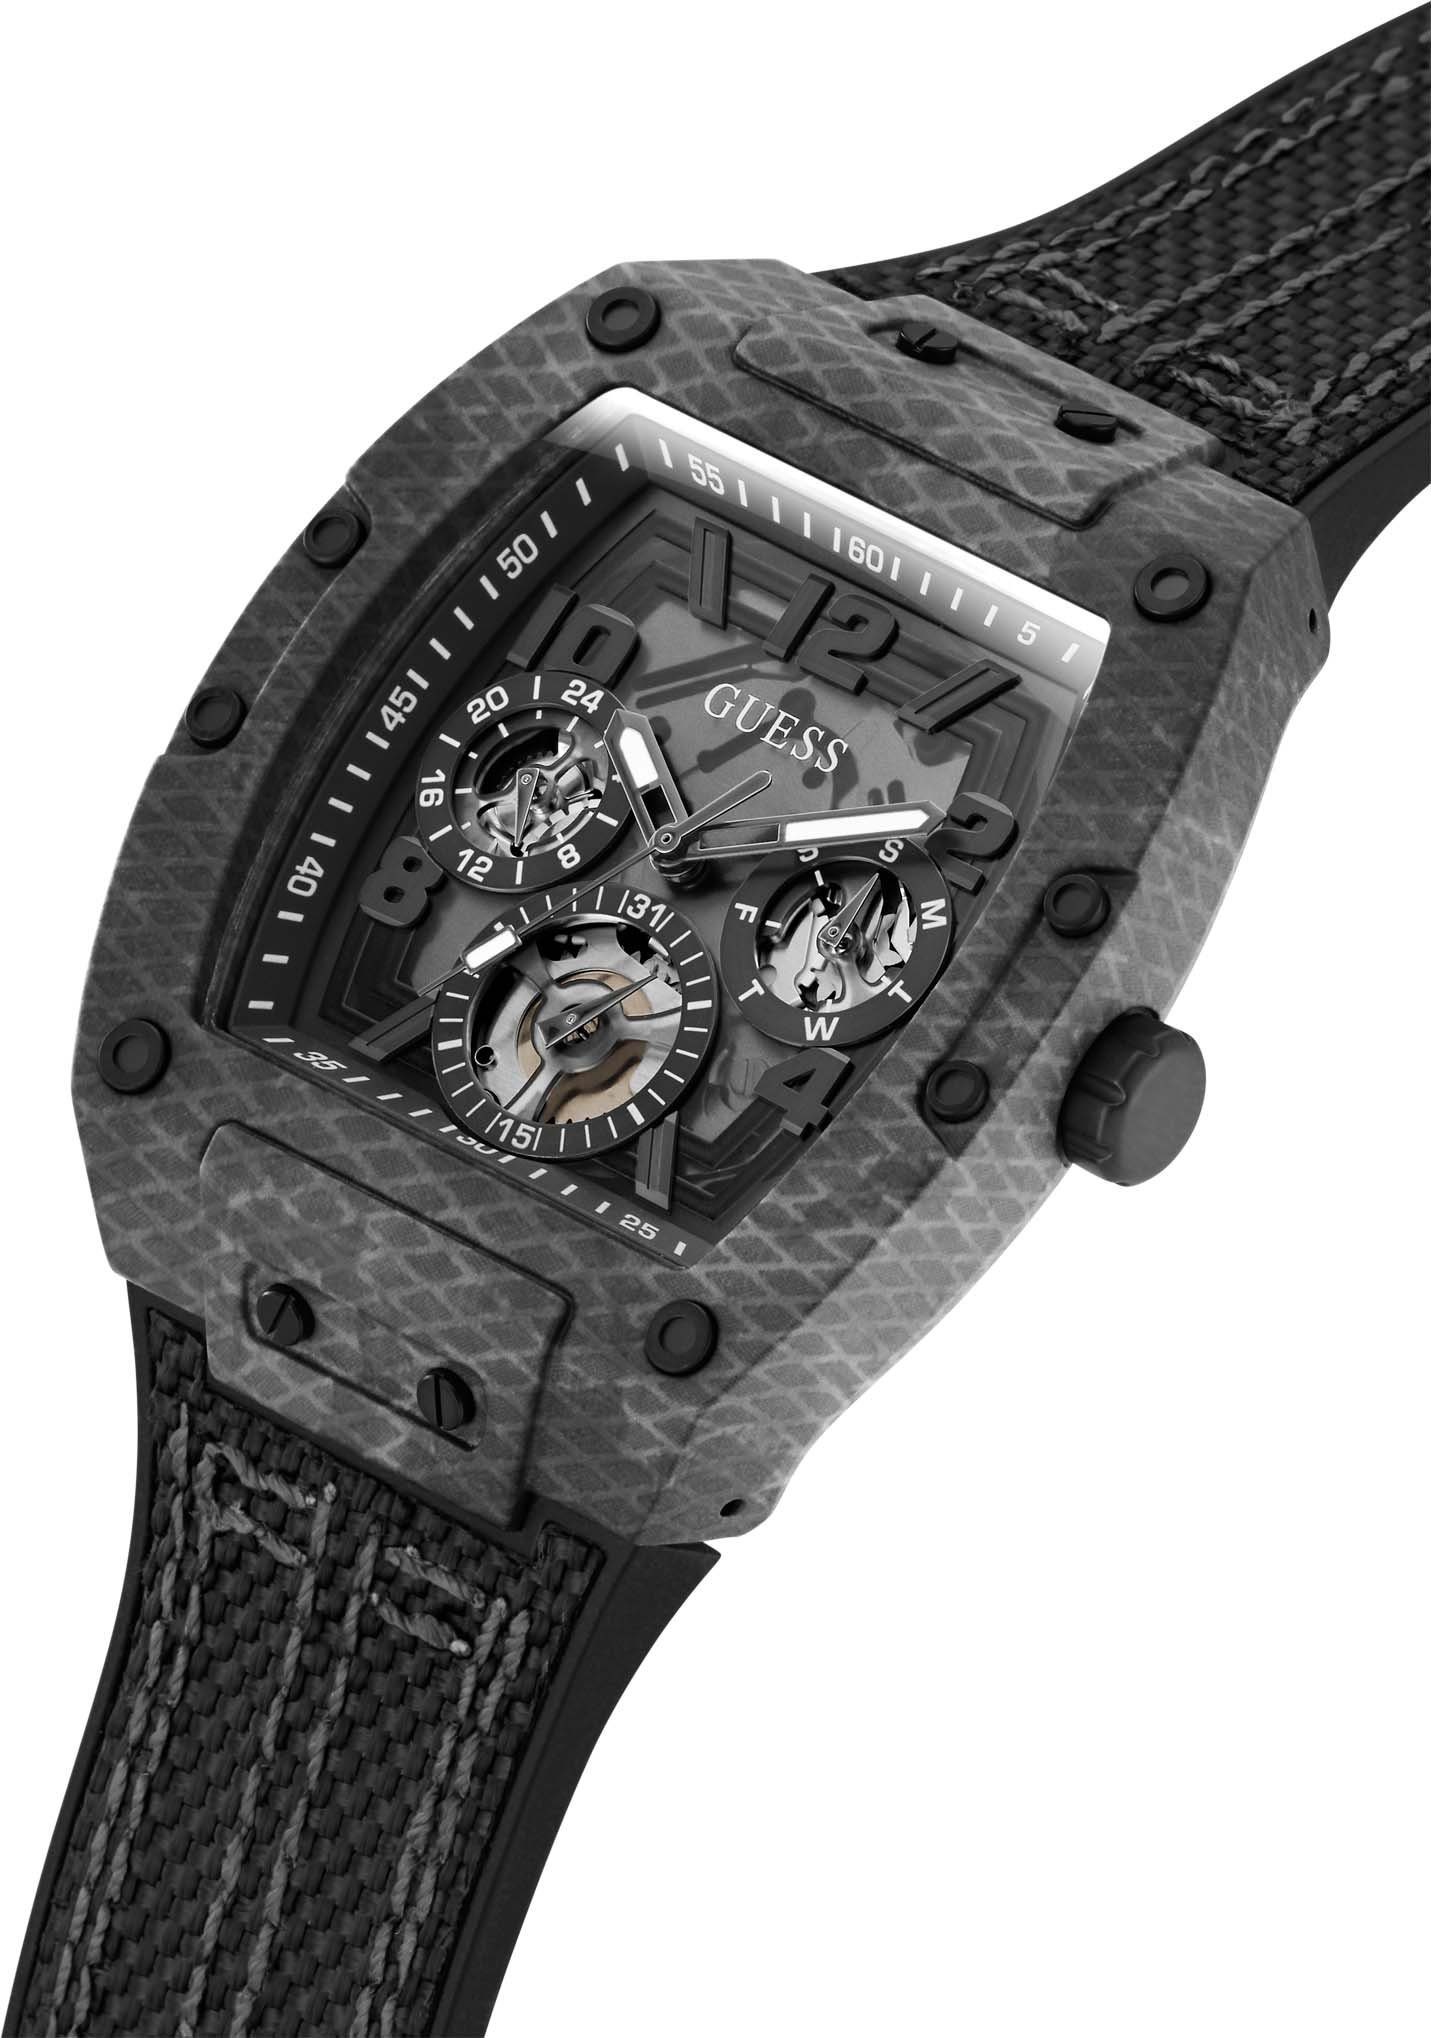 GW0422G2 Guess Multifunktionsuhr